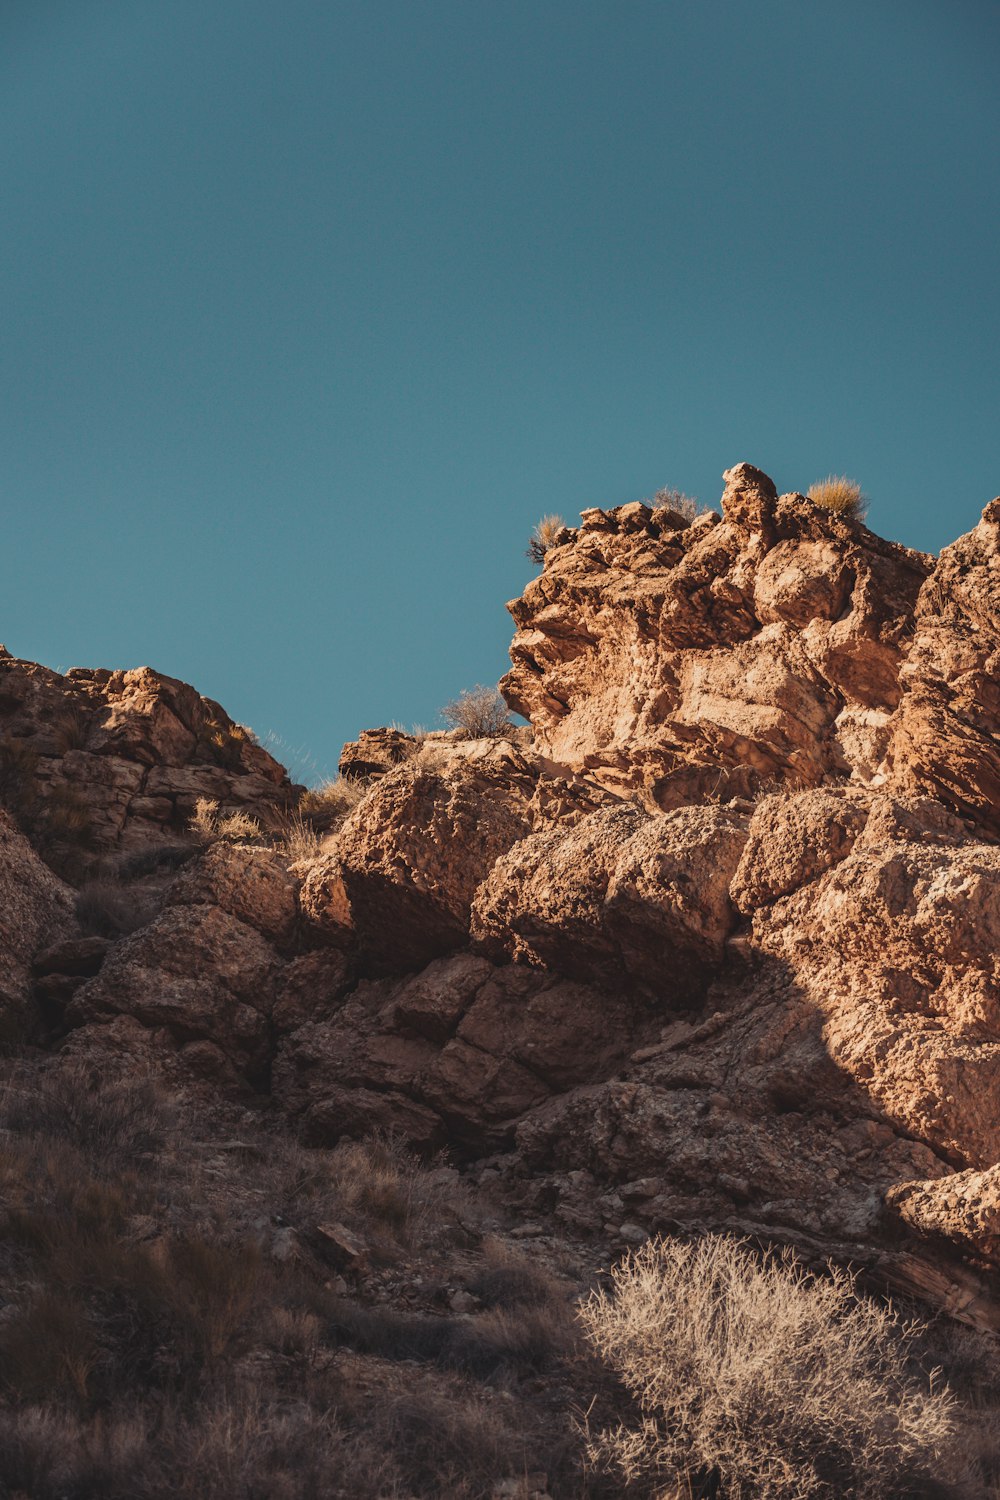 a lone bird is perched on a rock formation